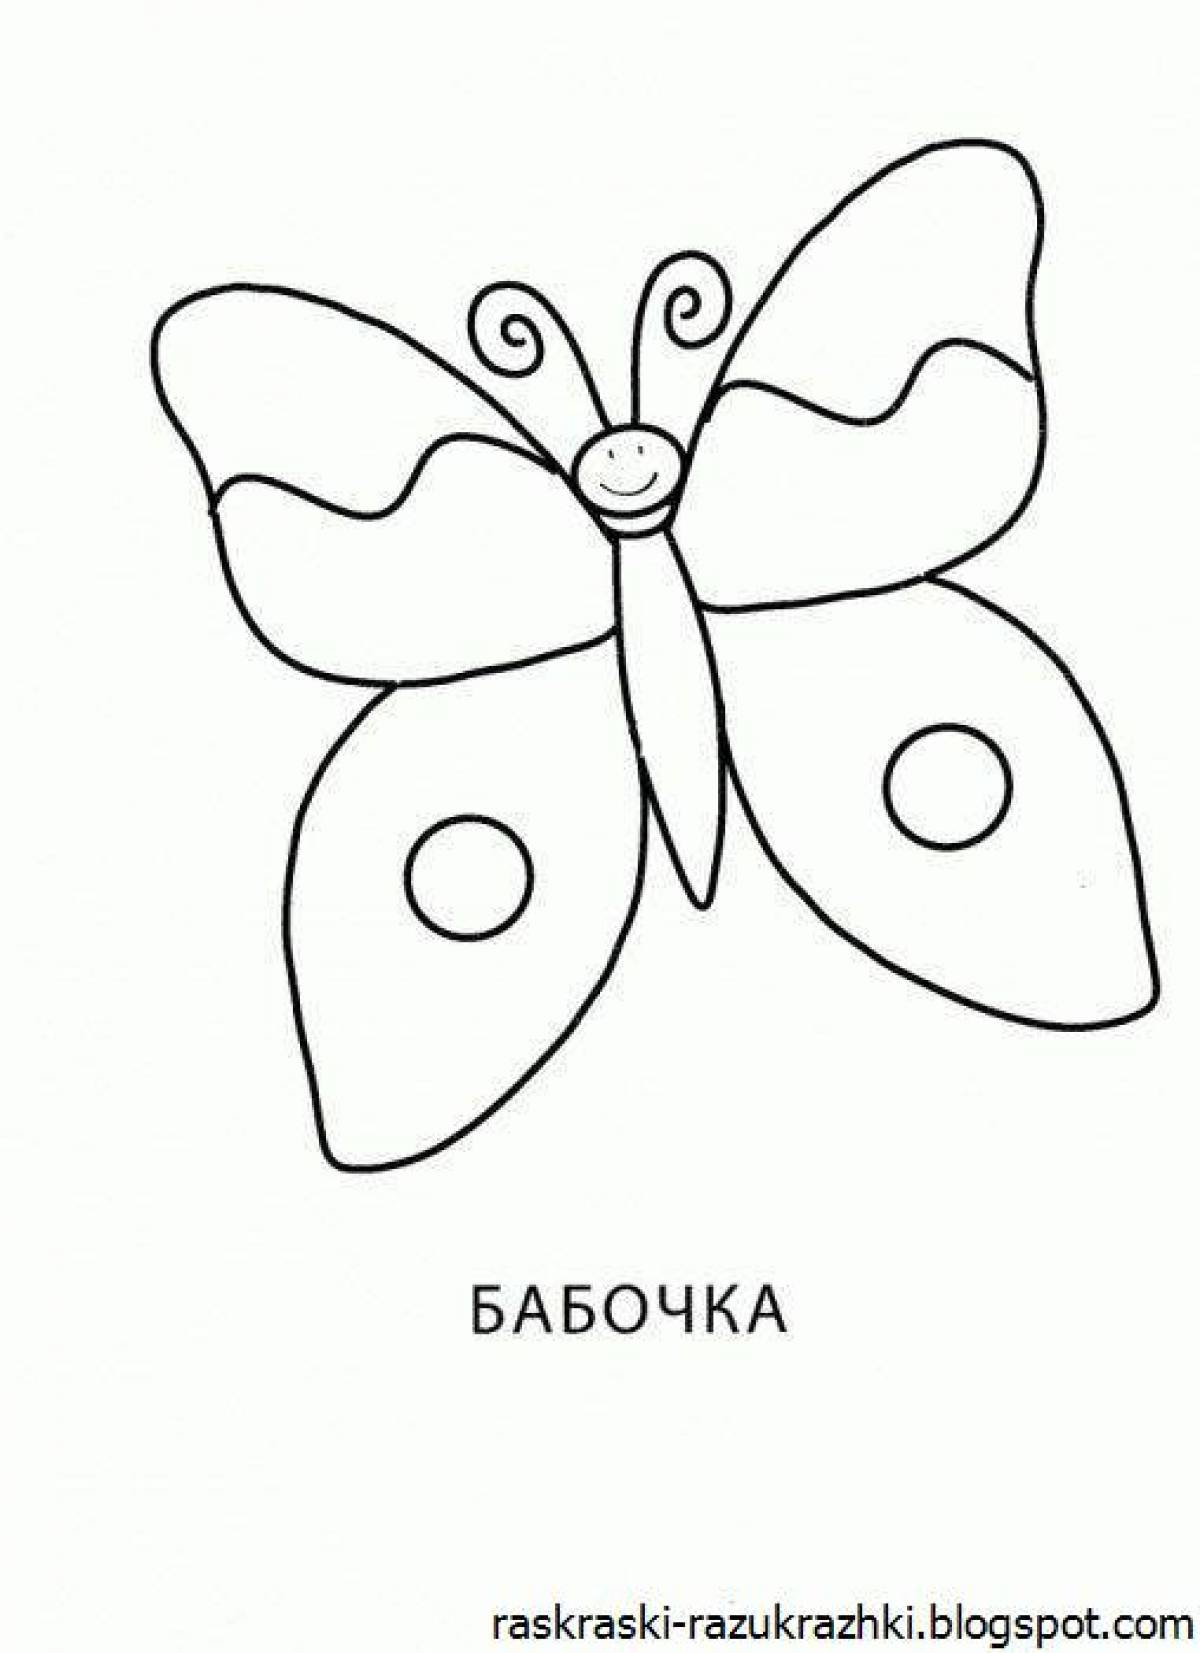 Exquisite butterfly coloring book for 3-4 year olds